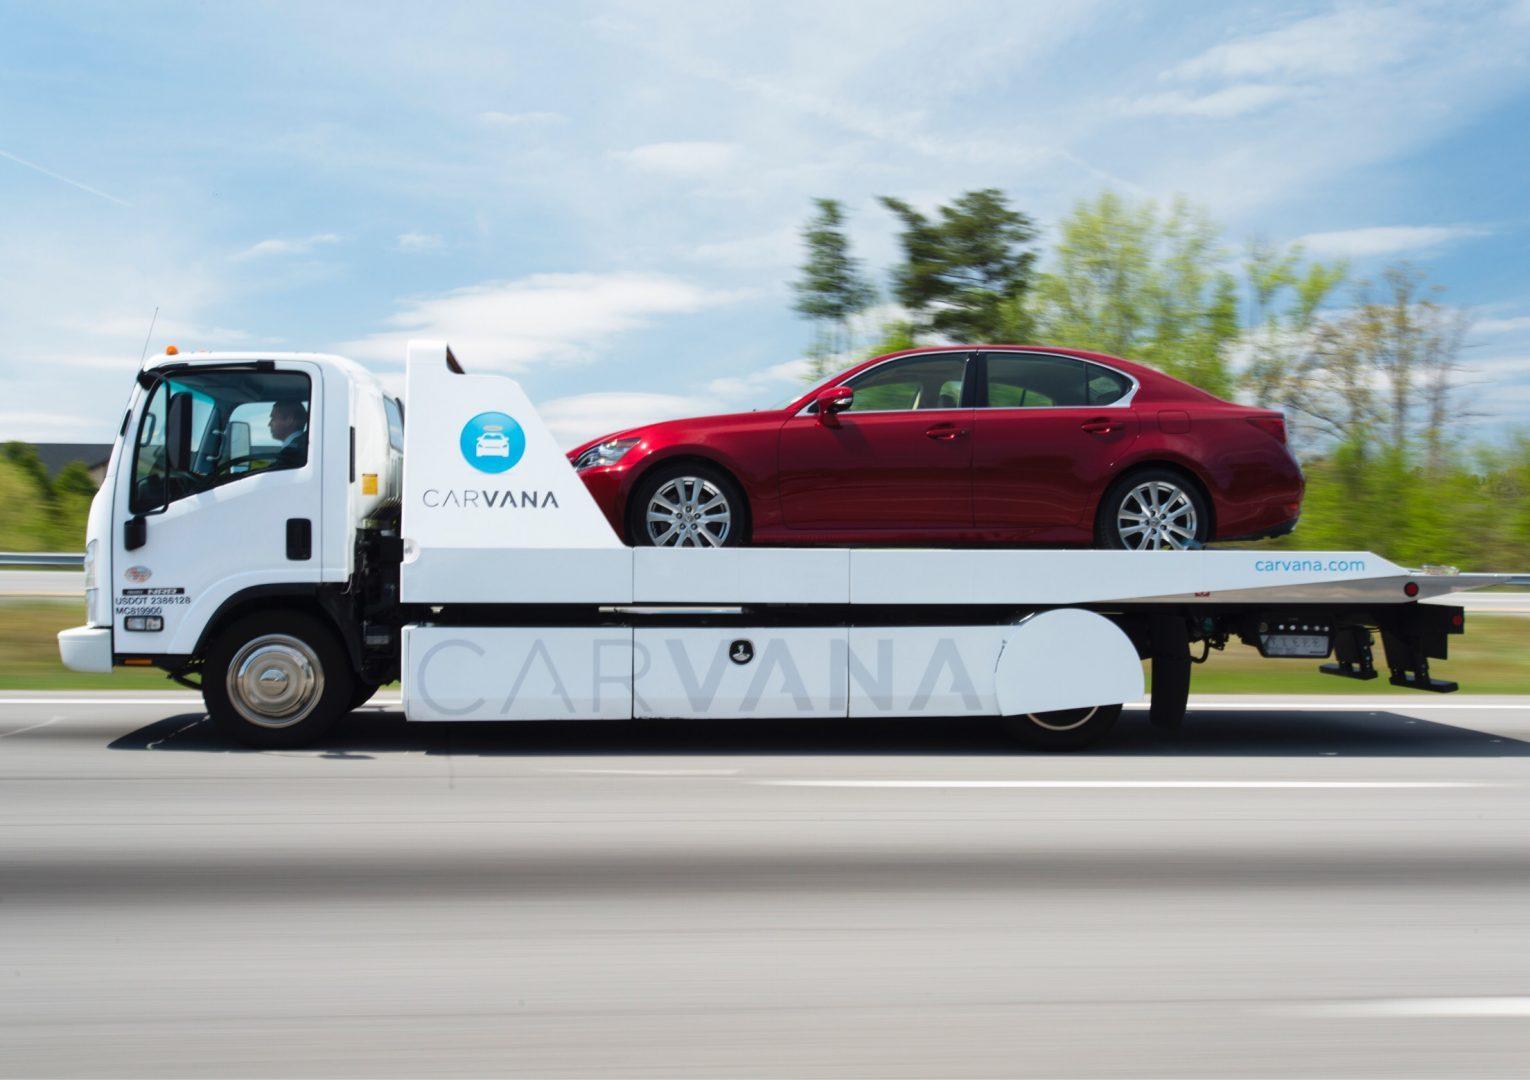 Carvana offers online car buying options and next-day delivery for its shoppers. (Courtesy of Carvana)